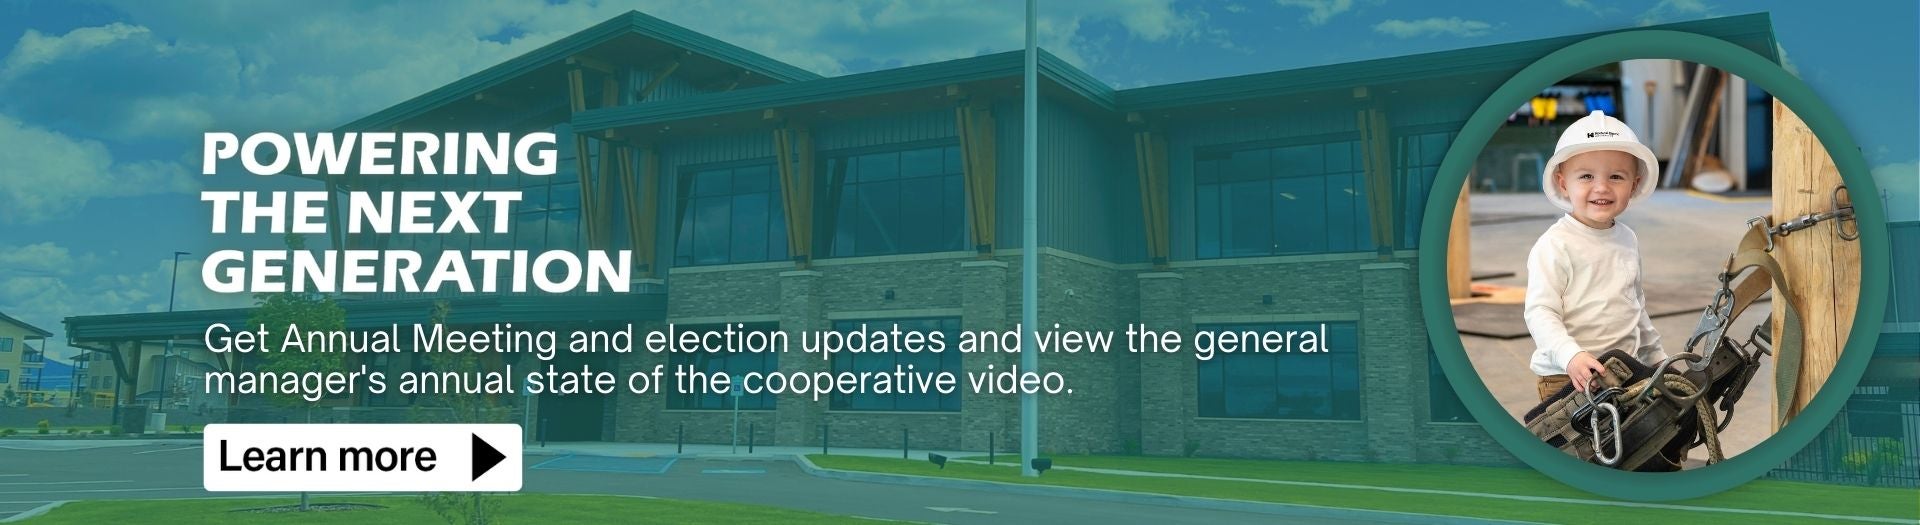 Powering the Next Generation: Get annual meeting and election updates and view the general manager's annual state of the cooperative video.